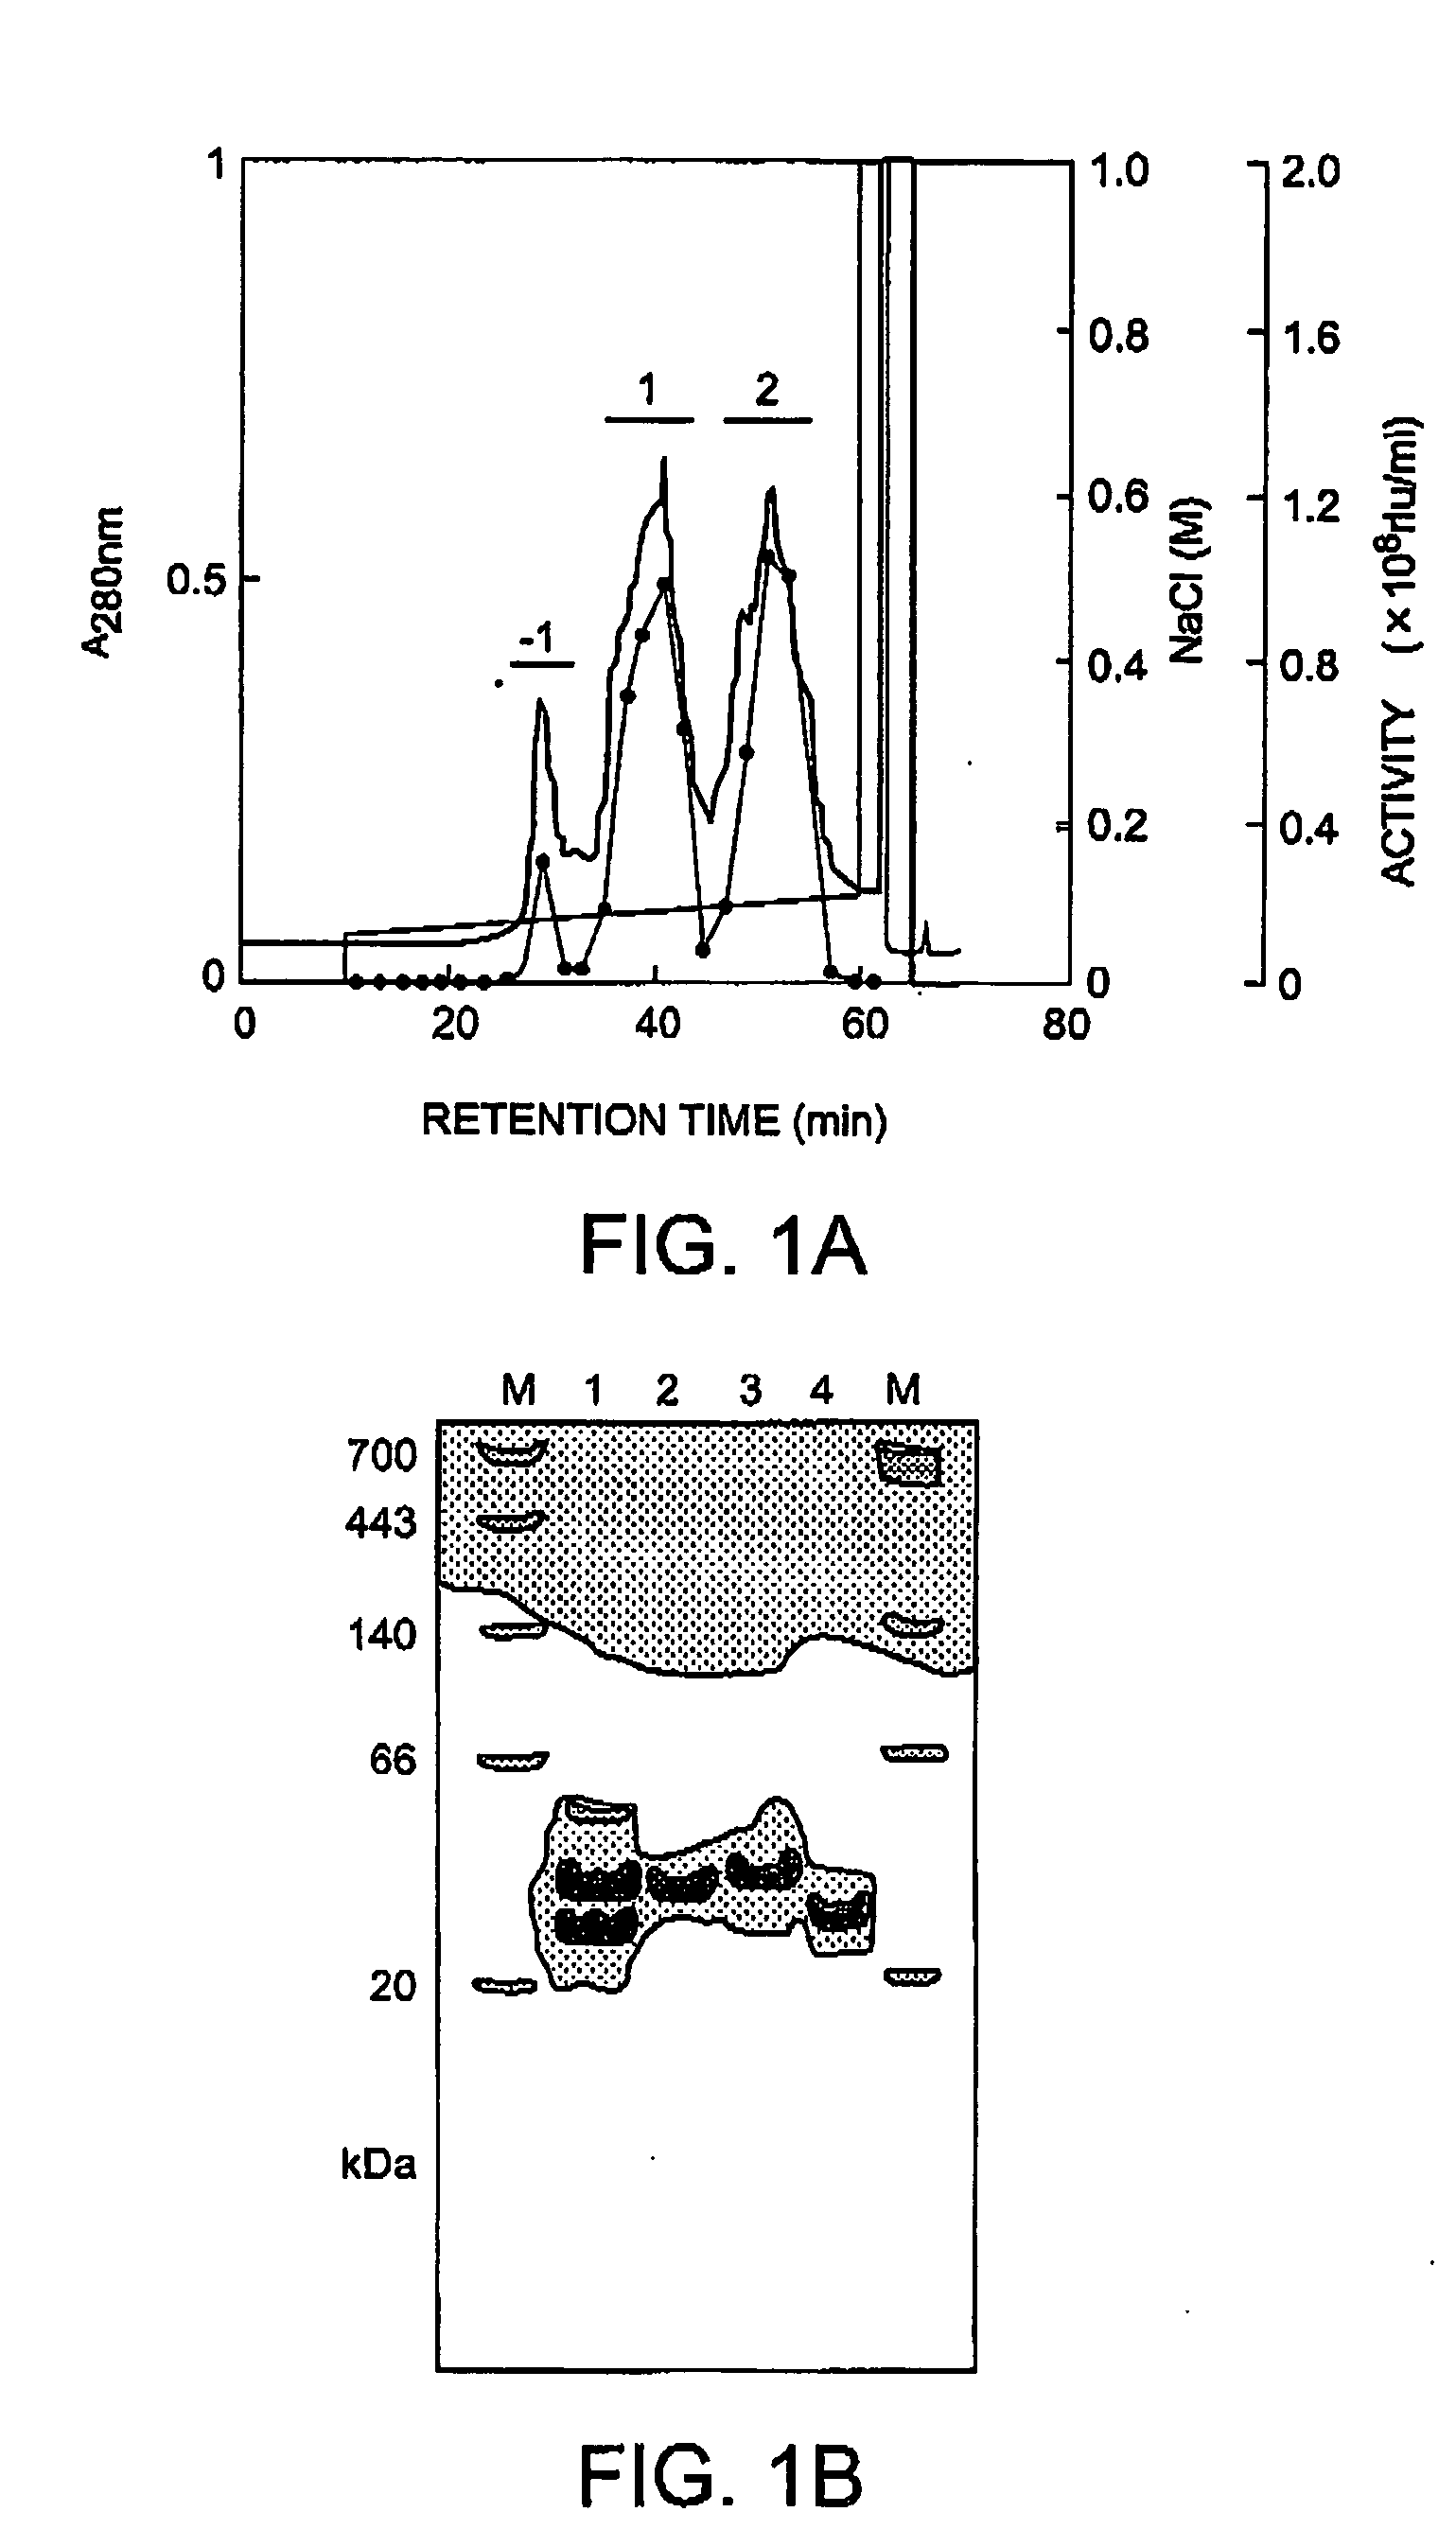 Method of isolating and purifying aequorin, aequorin produced by the method, and process for detecting calcium ions with aequorin